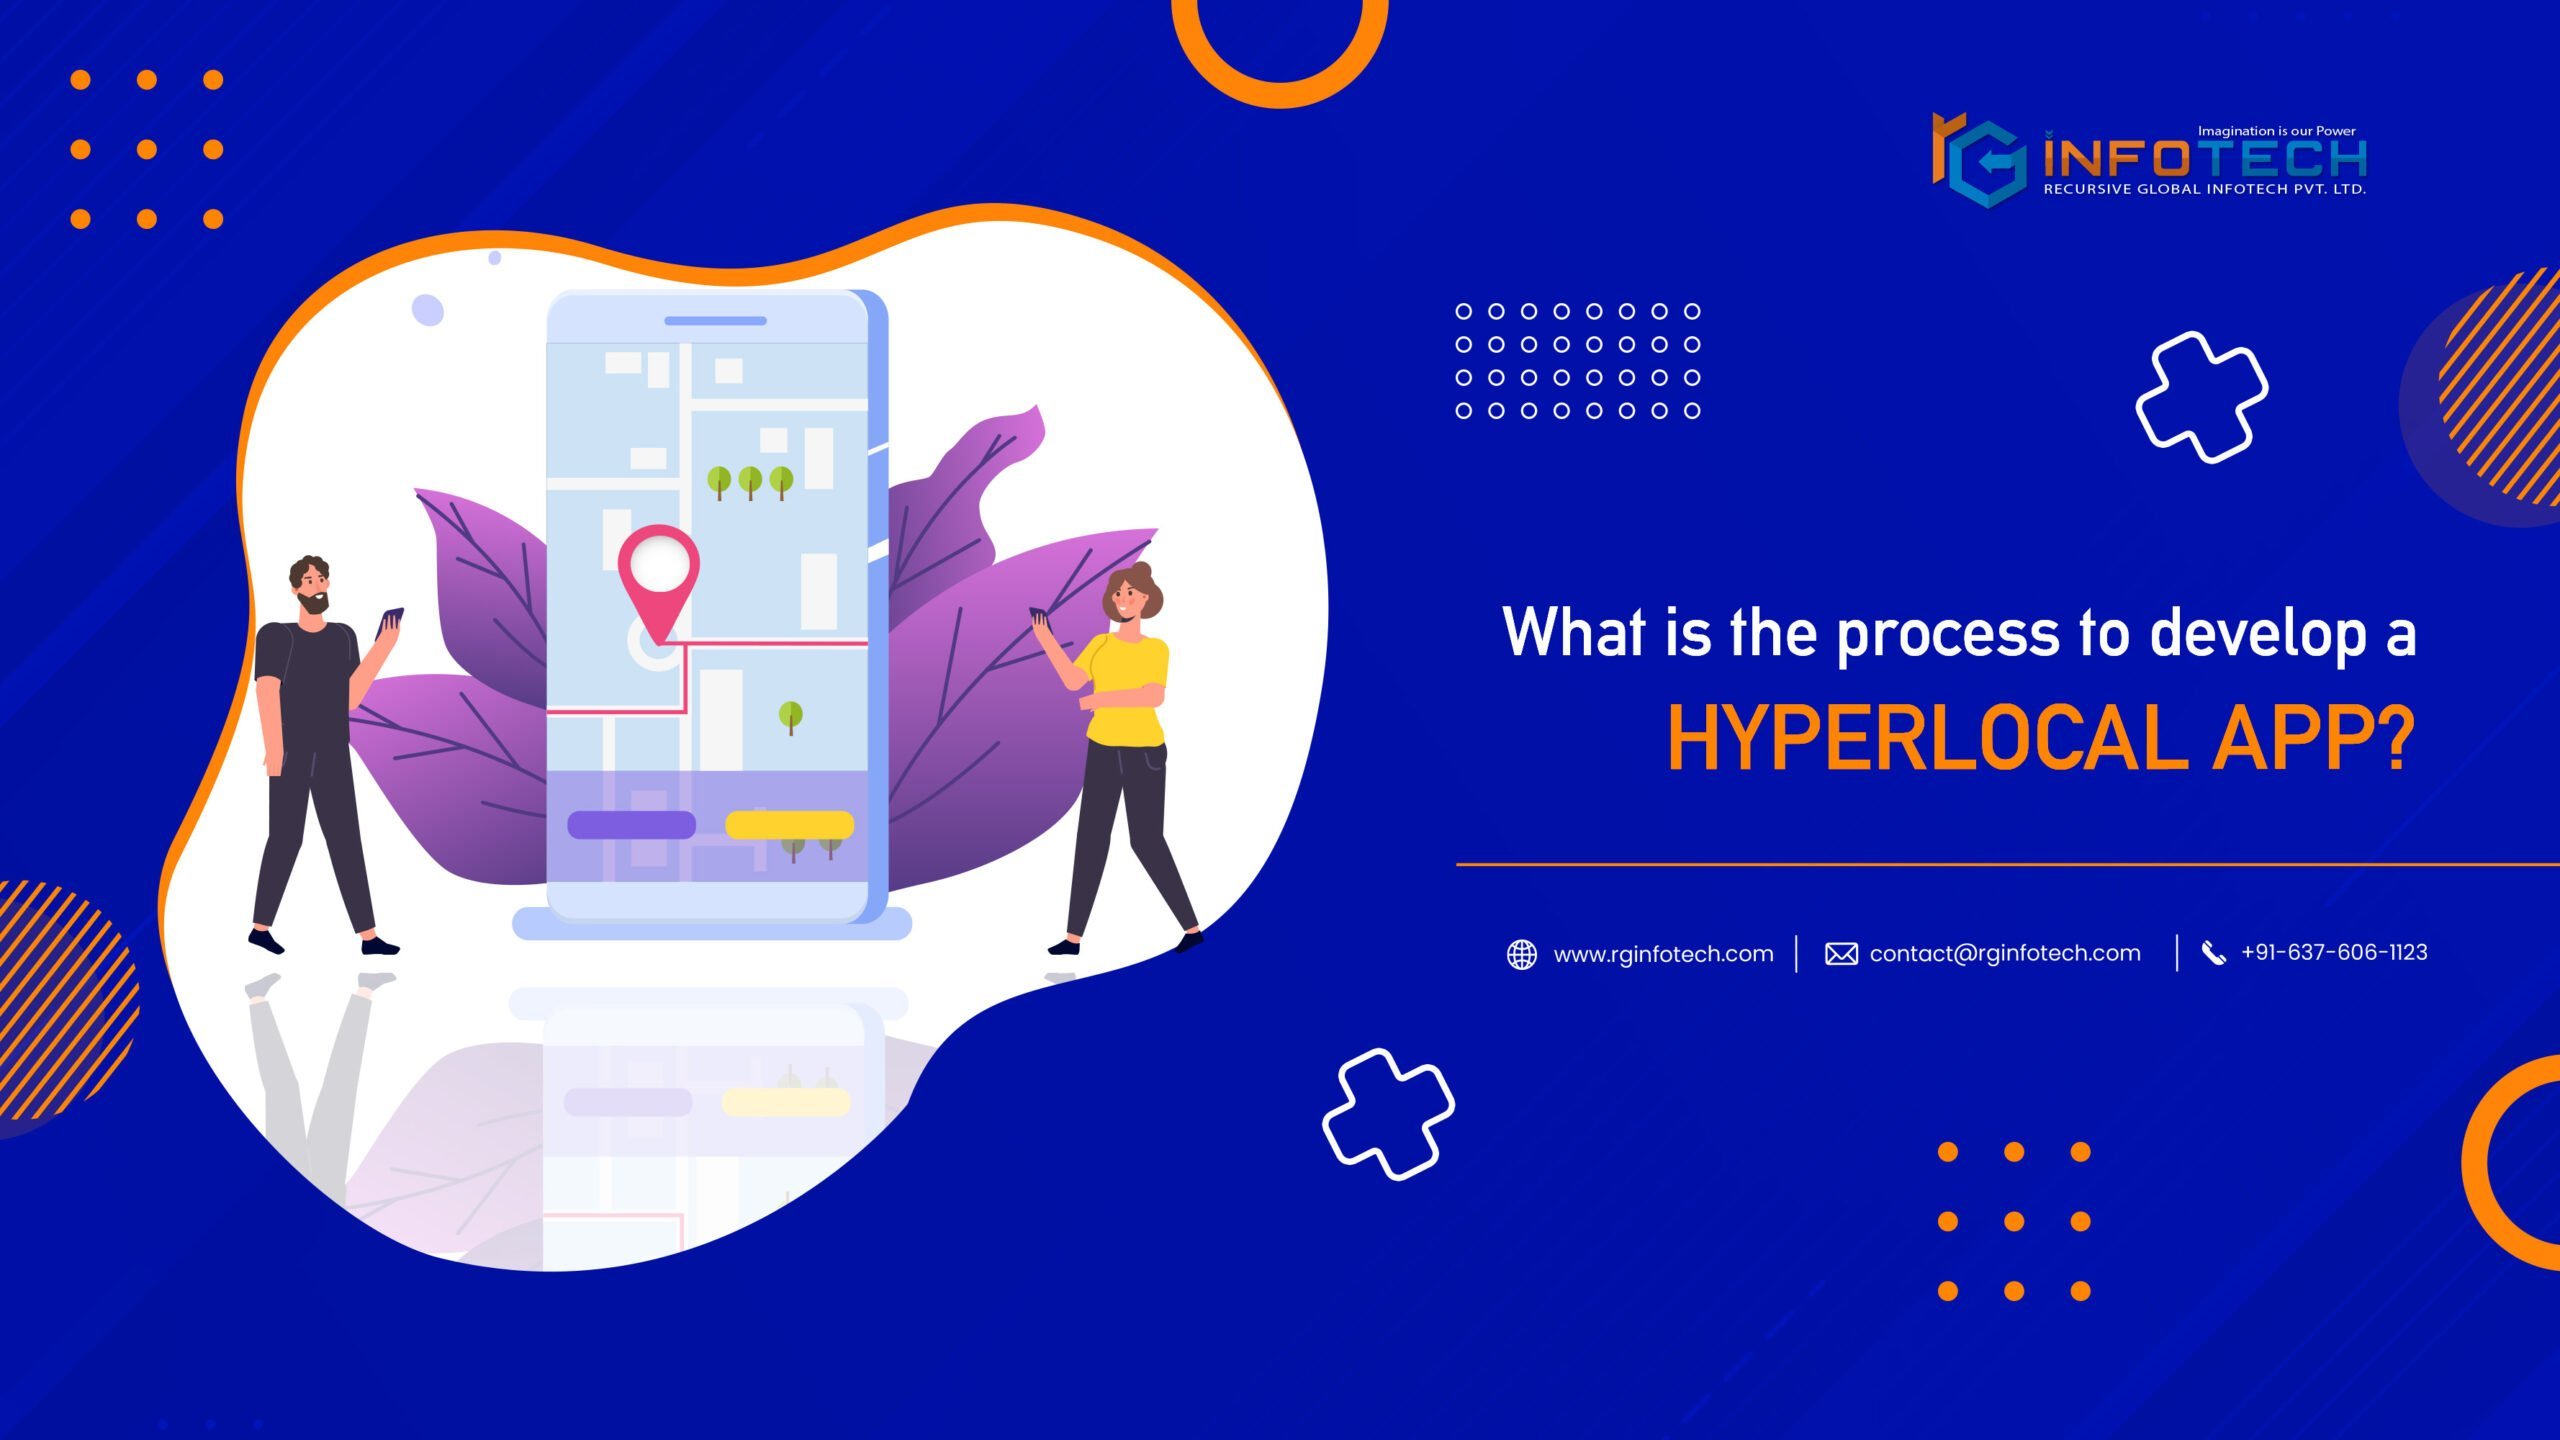 What are the statistics of the hyperlocal app market?